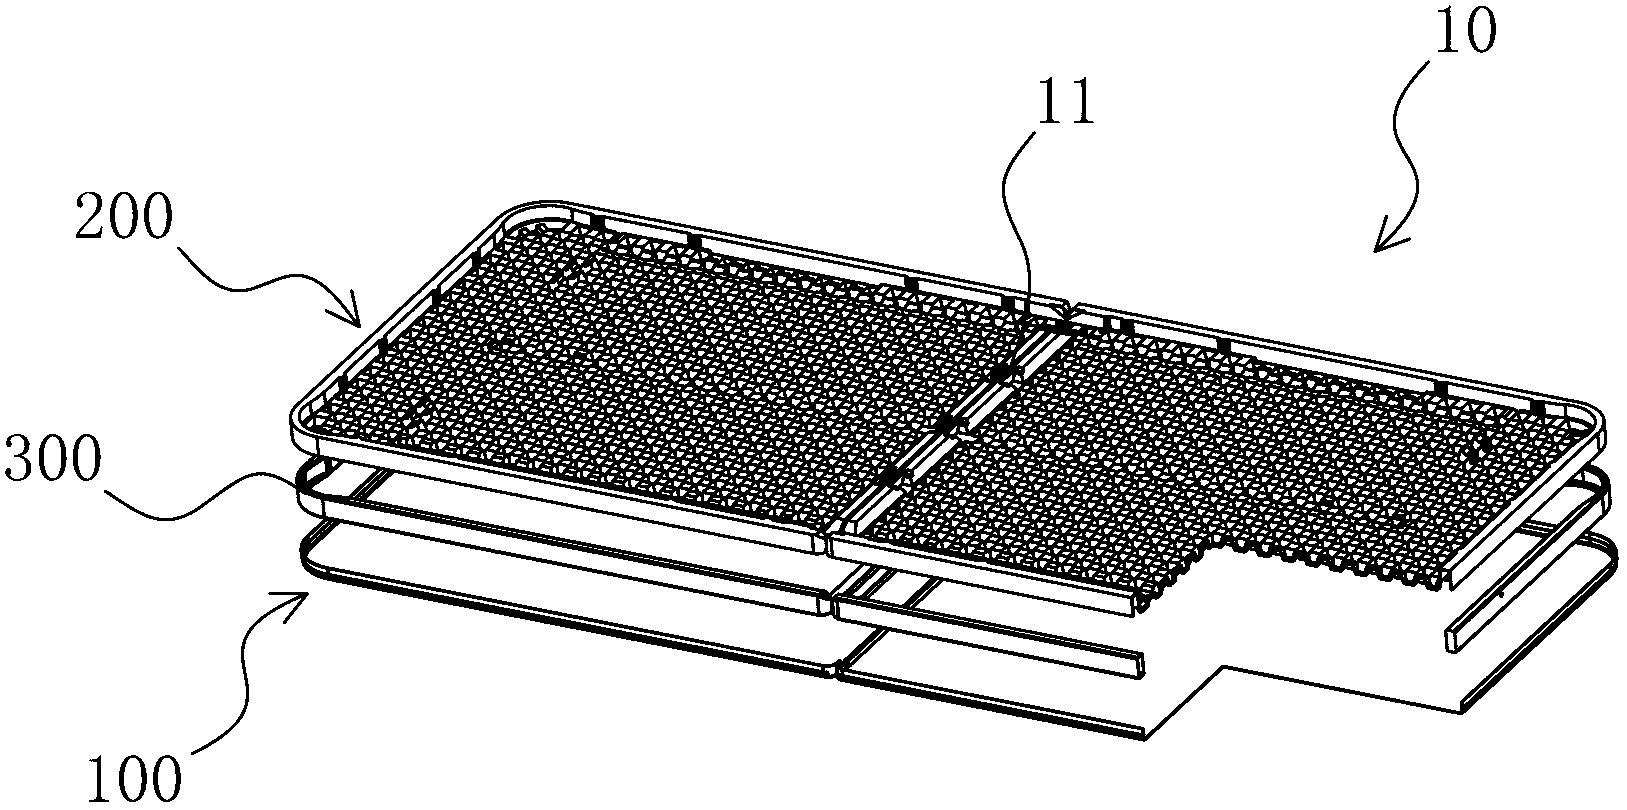 Structure of composite table top